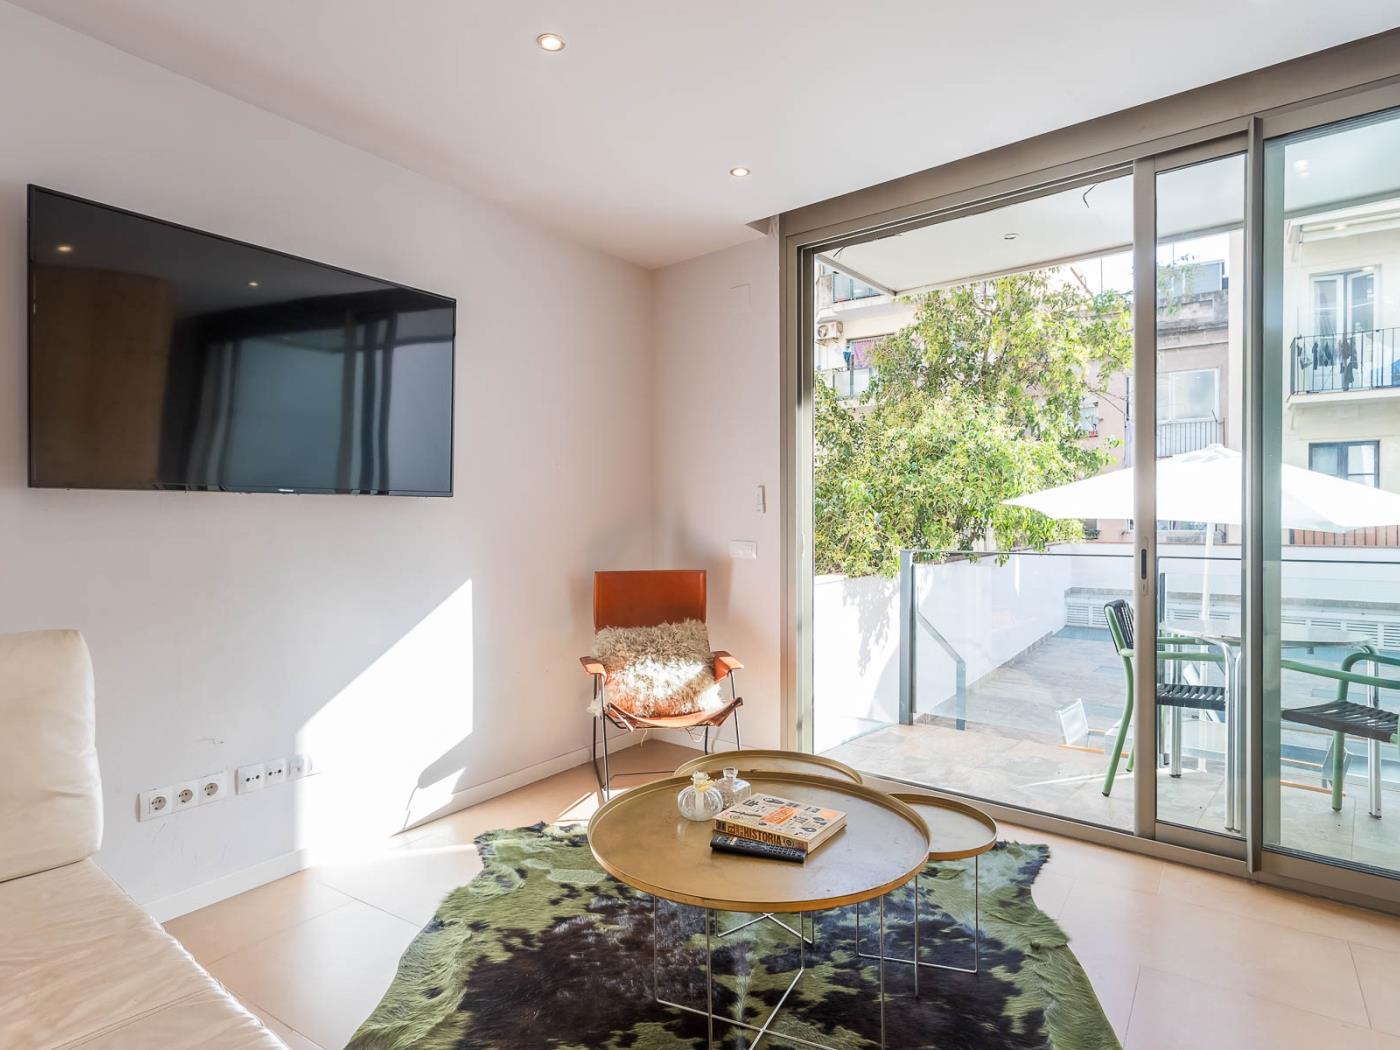 Lovely apartment with big private terrace in Sant Gervasy for monthly rentals - My Space Barcelona Apartments